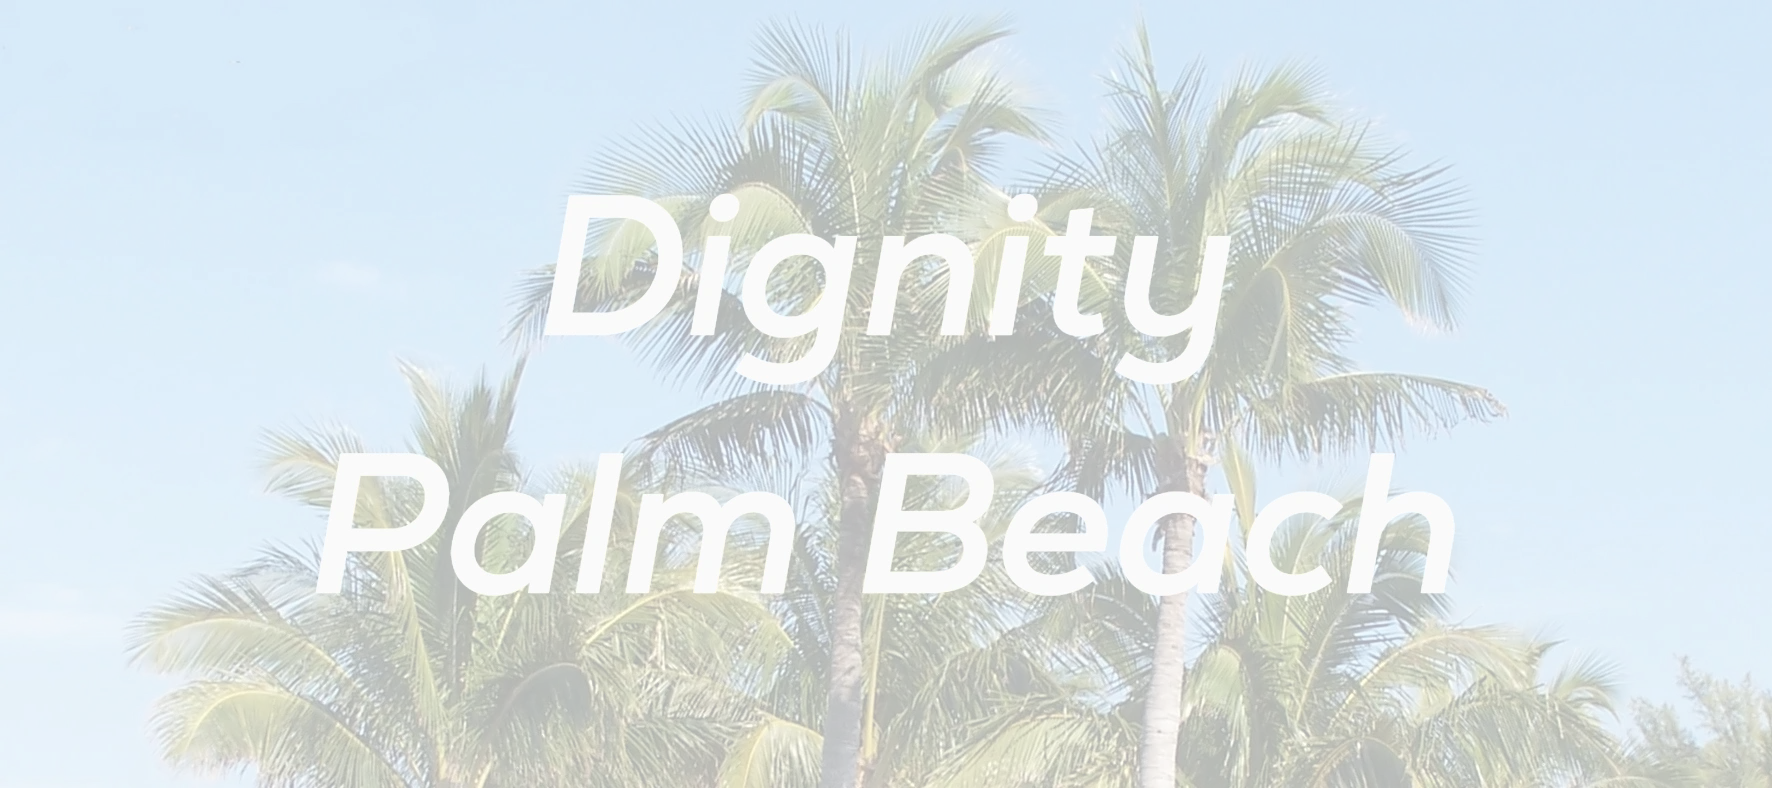 Dignity/Palm Beach is a local chapter of Dignity/USA, a national organization serving the LGBTQI+ Ca